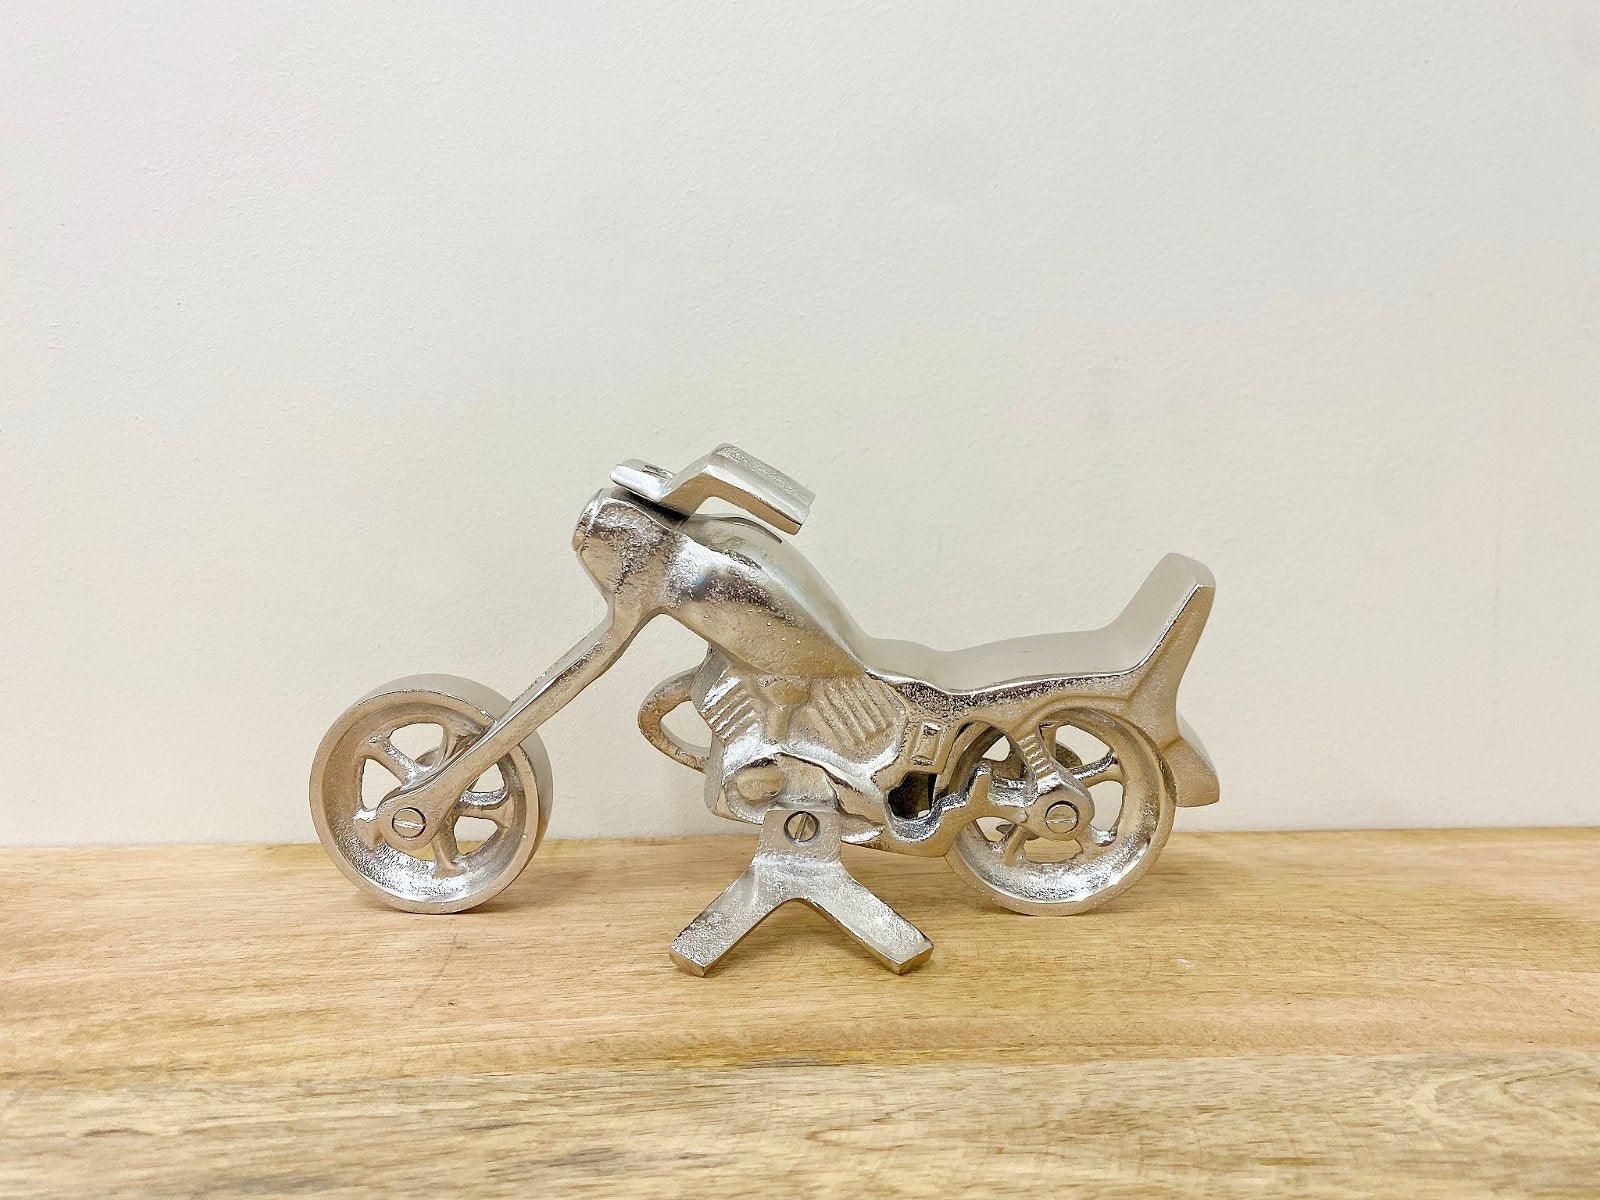 View Silver Aluminium Motorcycle Ornament information